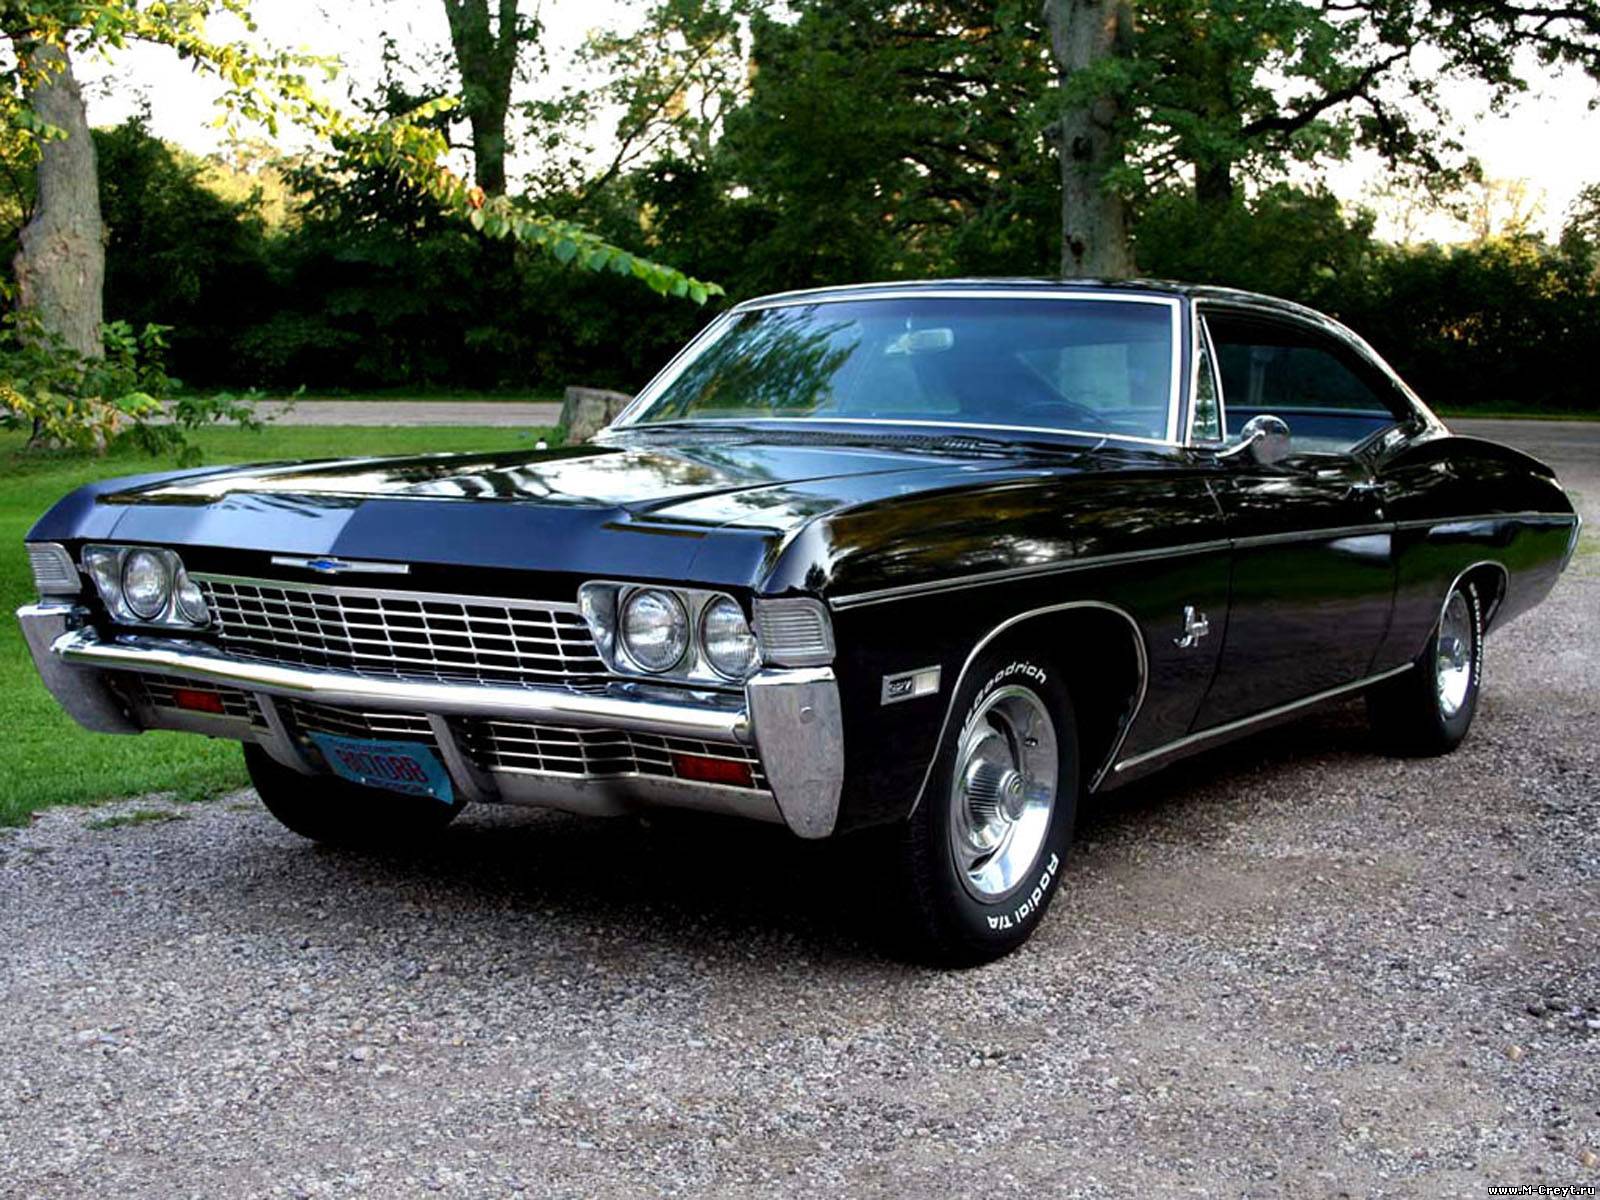 HD Chevrolet Impala Wallpaper Full Pictures